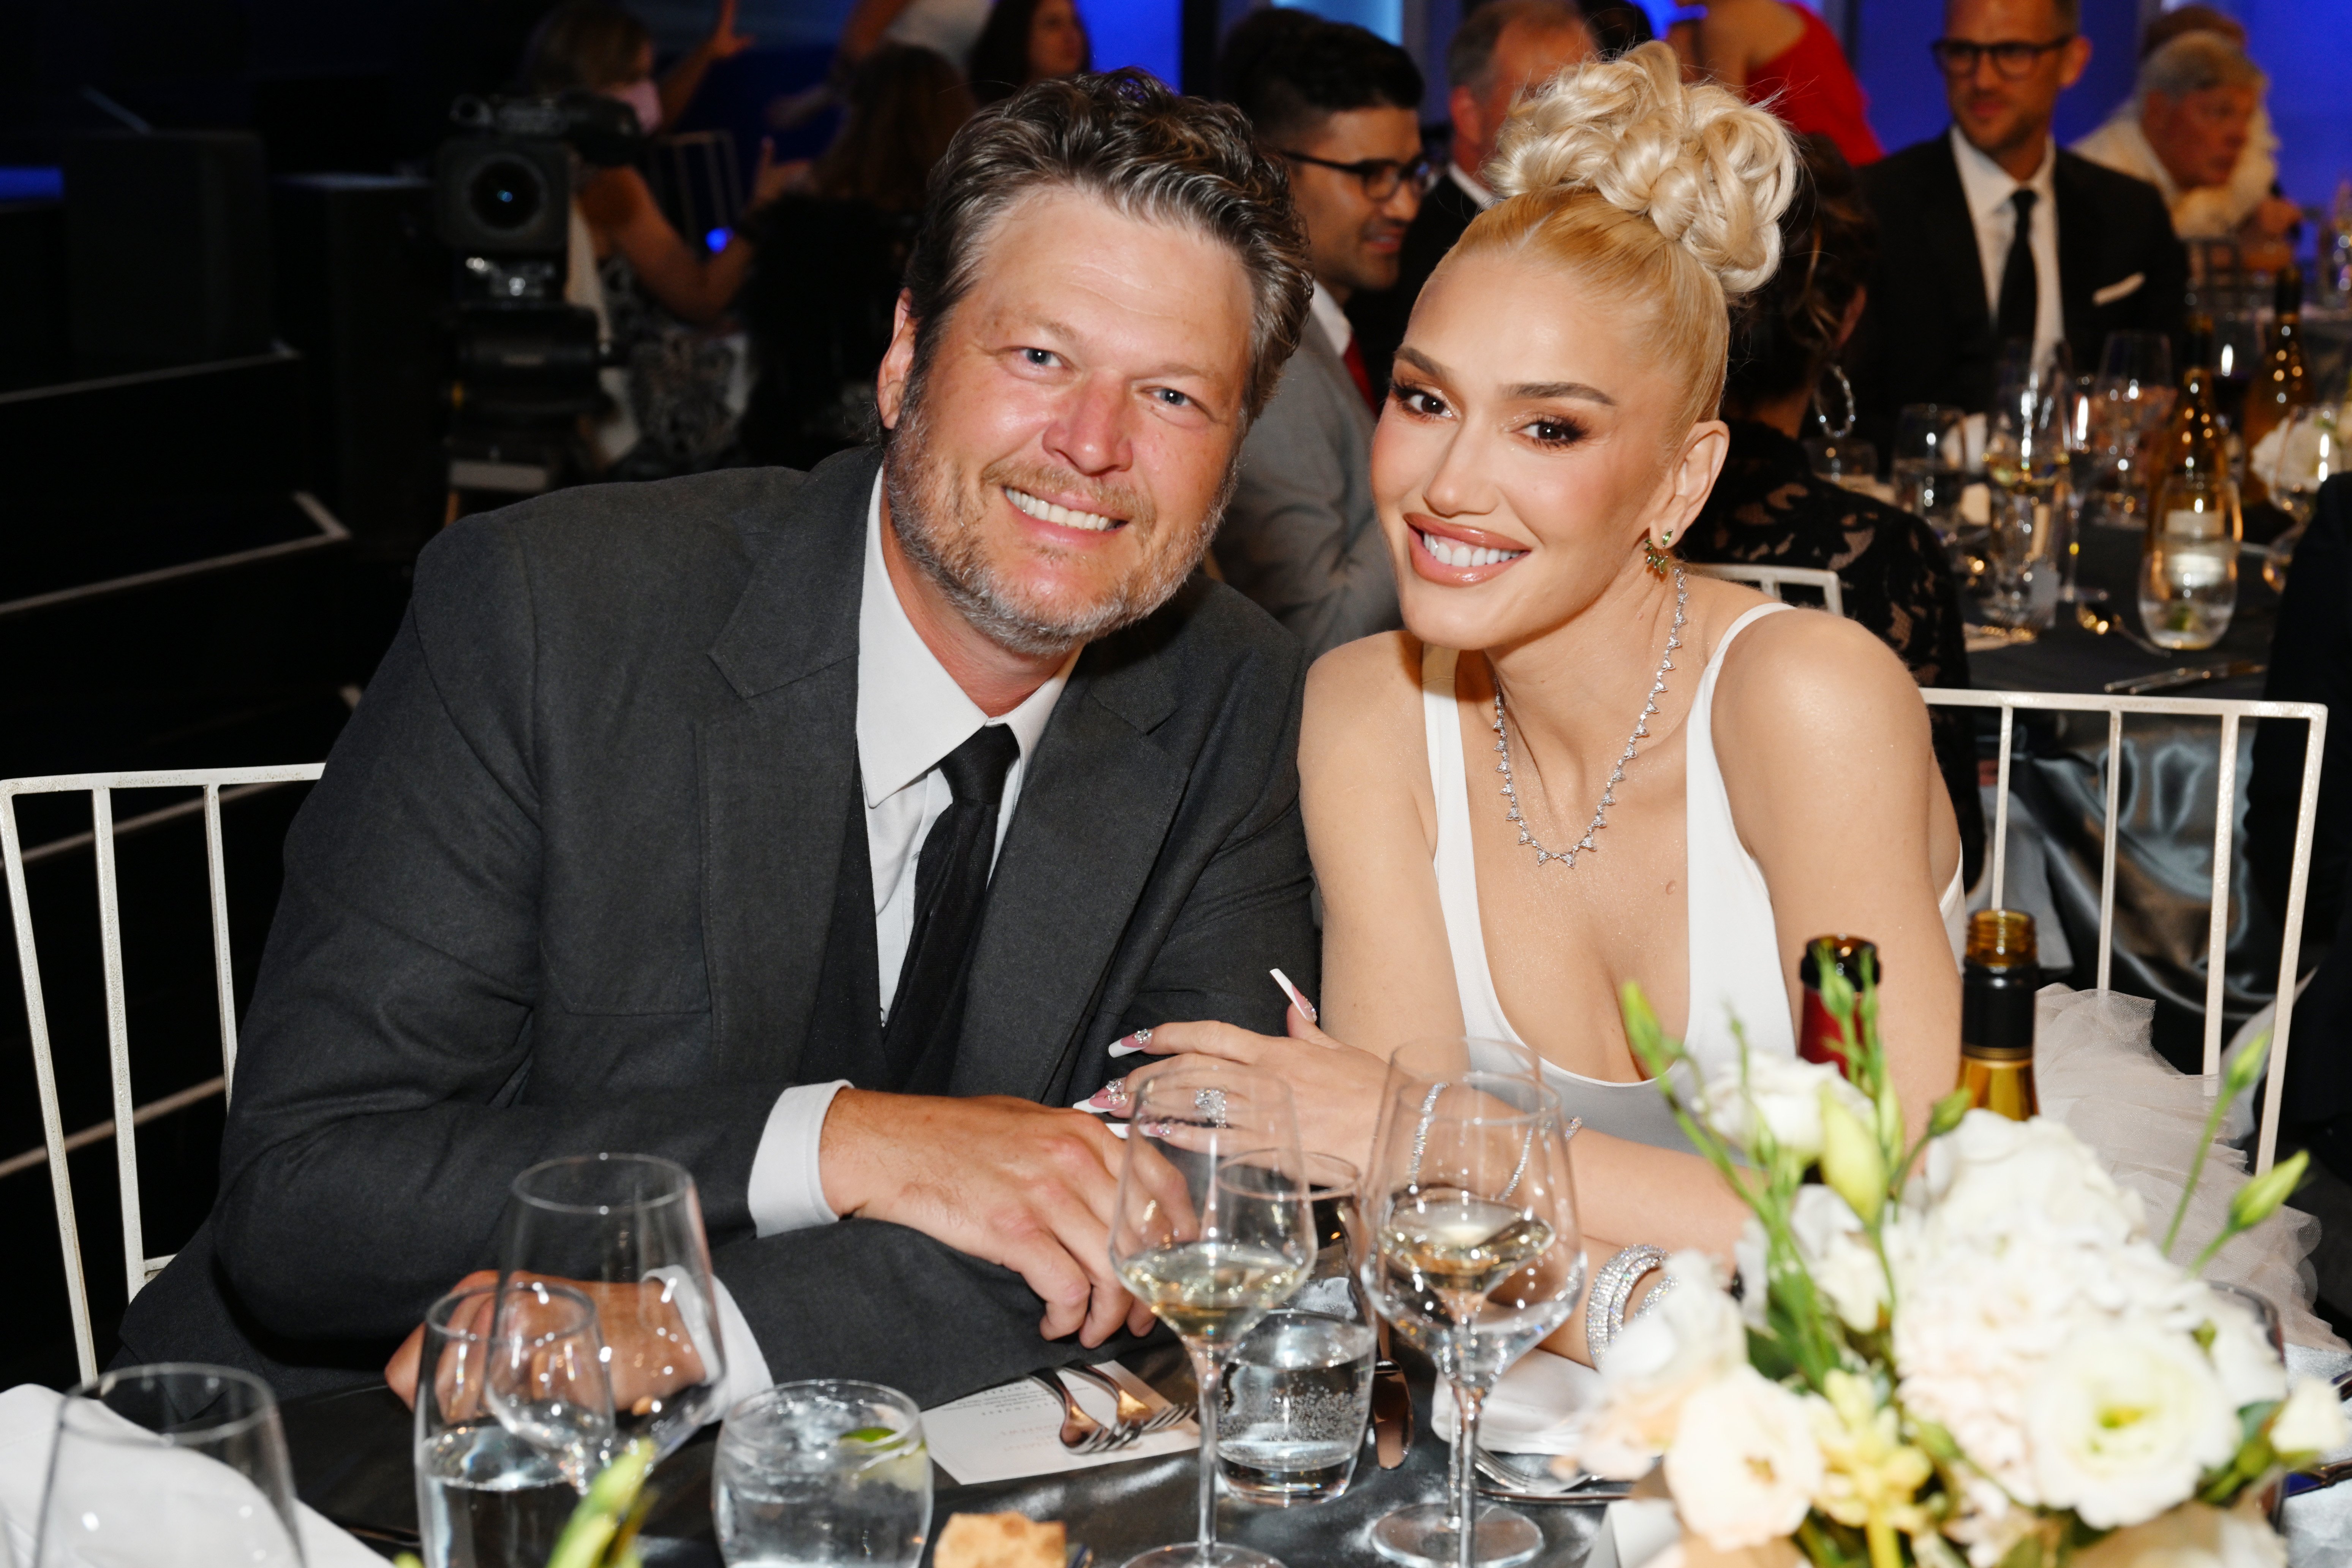 Blake Shelton and Gwen Stefani at the 48th AFI Life Achievement Award Gala Tribute on June 09, 2022 | Source: Getty Images